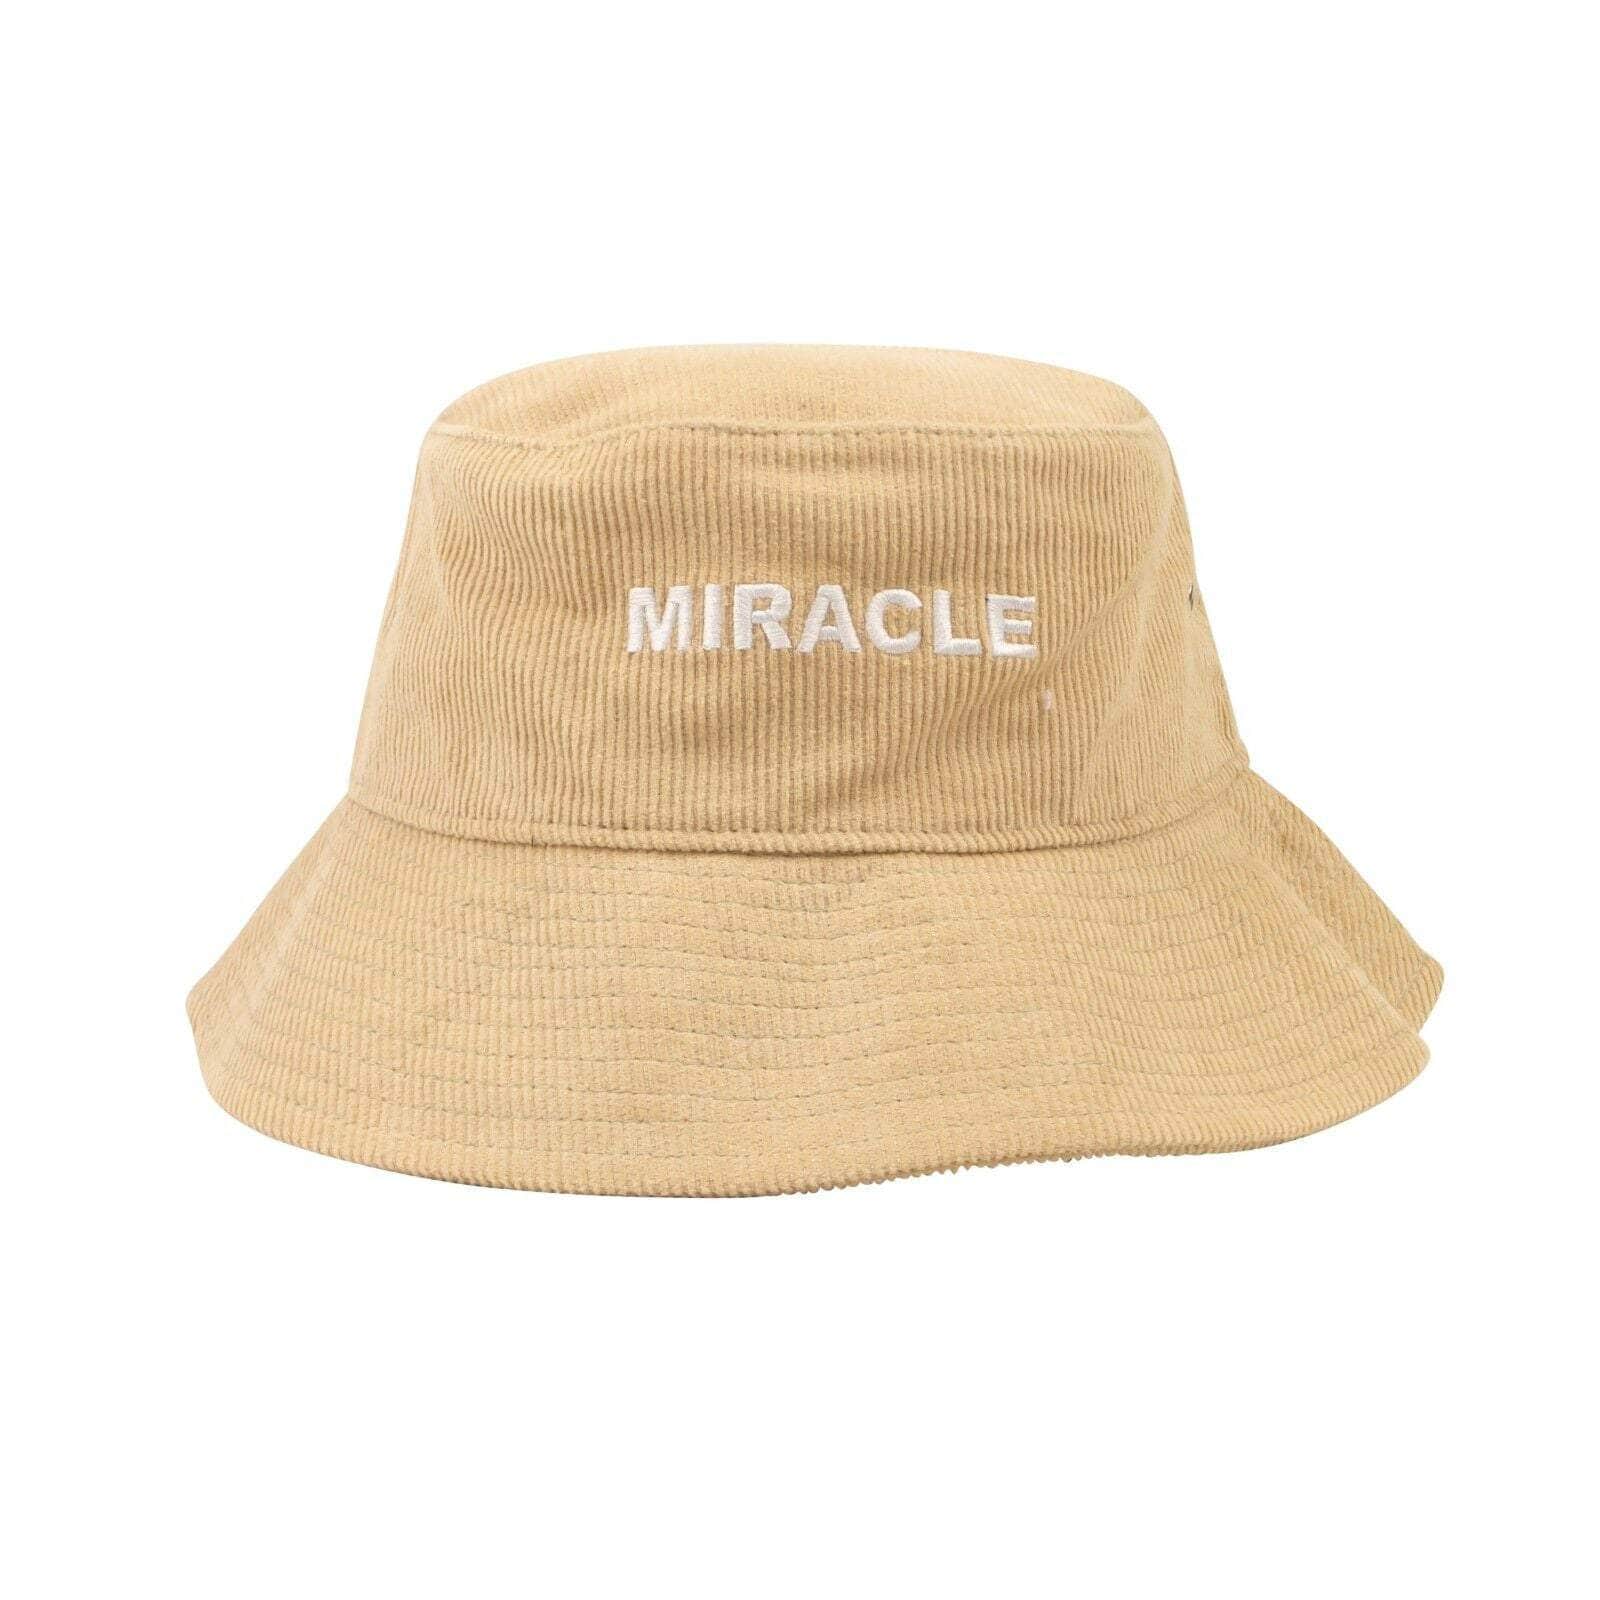 Nahmias channelenable-all, chicmi, couponcollection, gender-mens, main-accessories, mens-shoes, nahmias, size-os, under-250 OS Sand Corduroy Miracle Bucket Hat NMS-XACC-0003/OS NMS-XACC-0003/OS